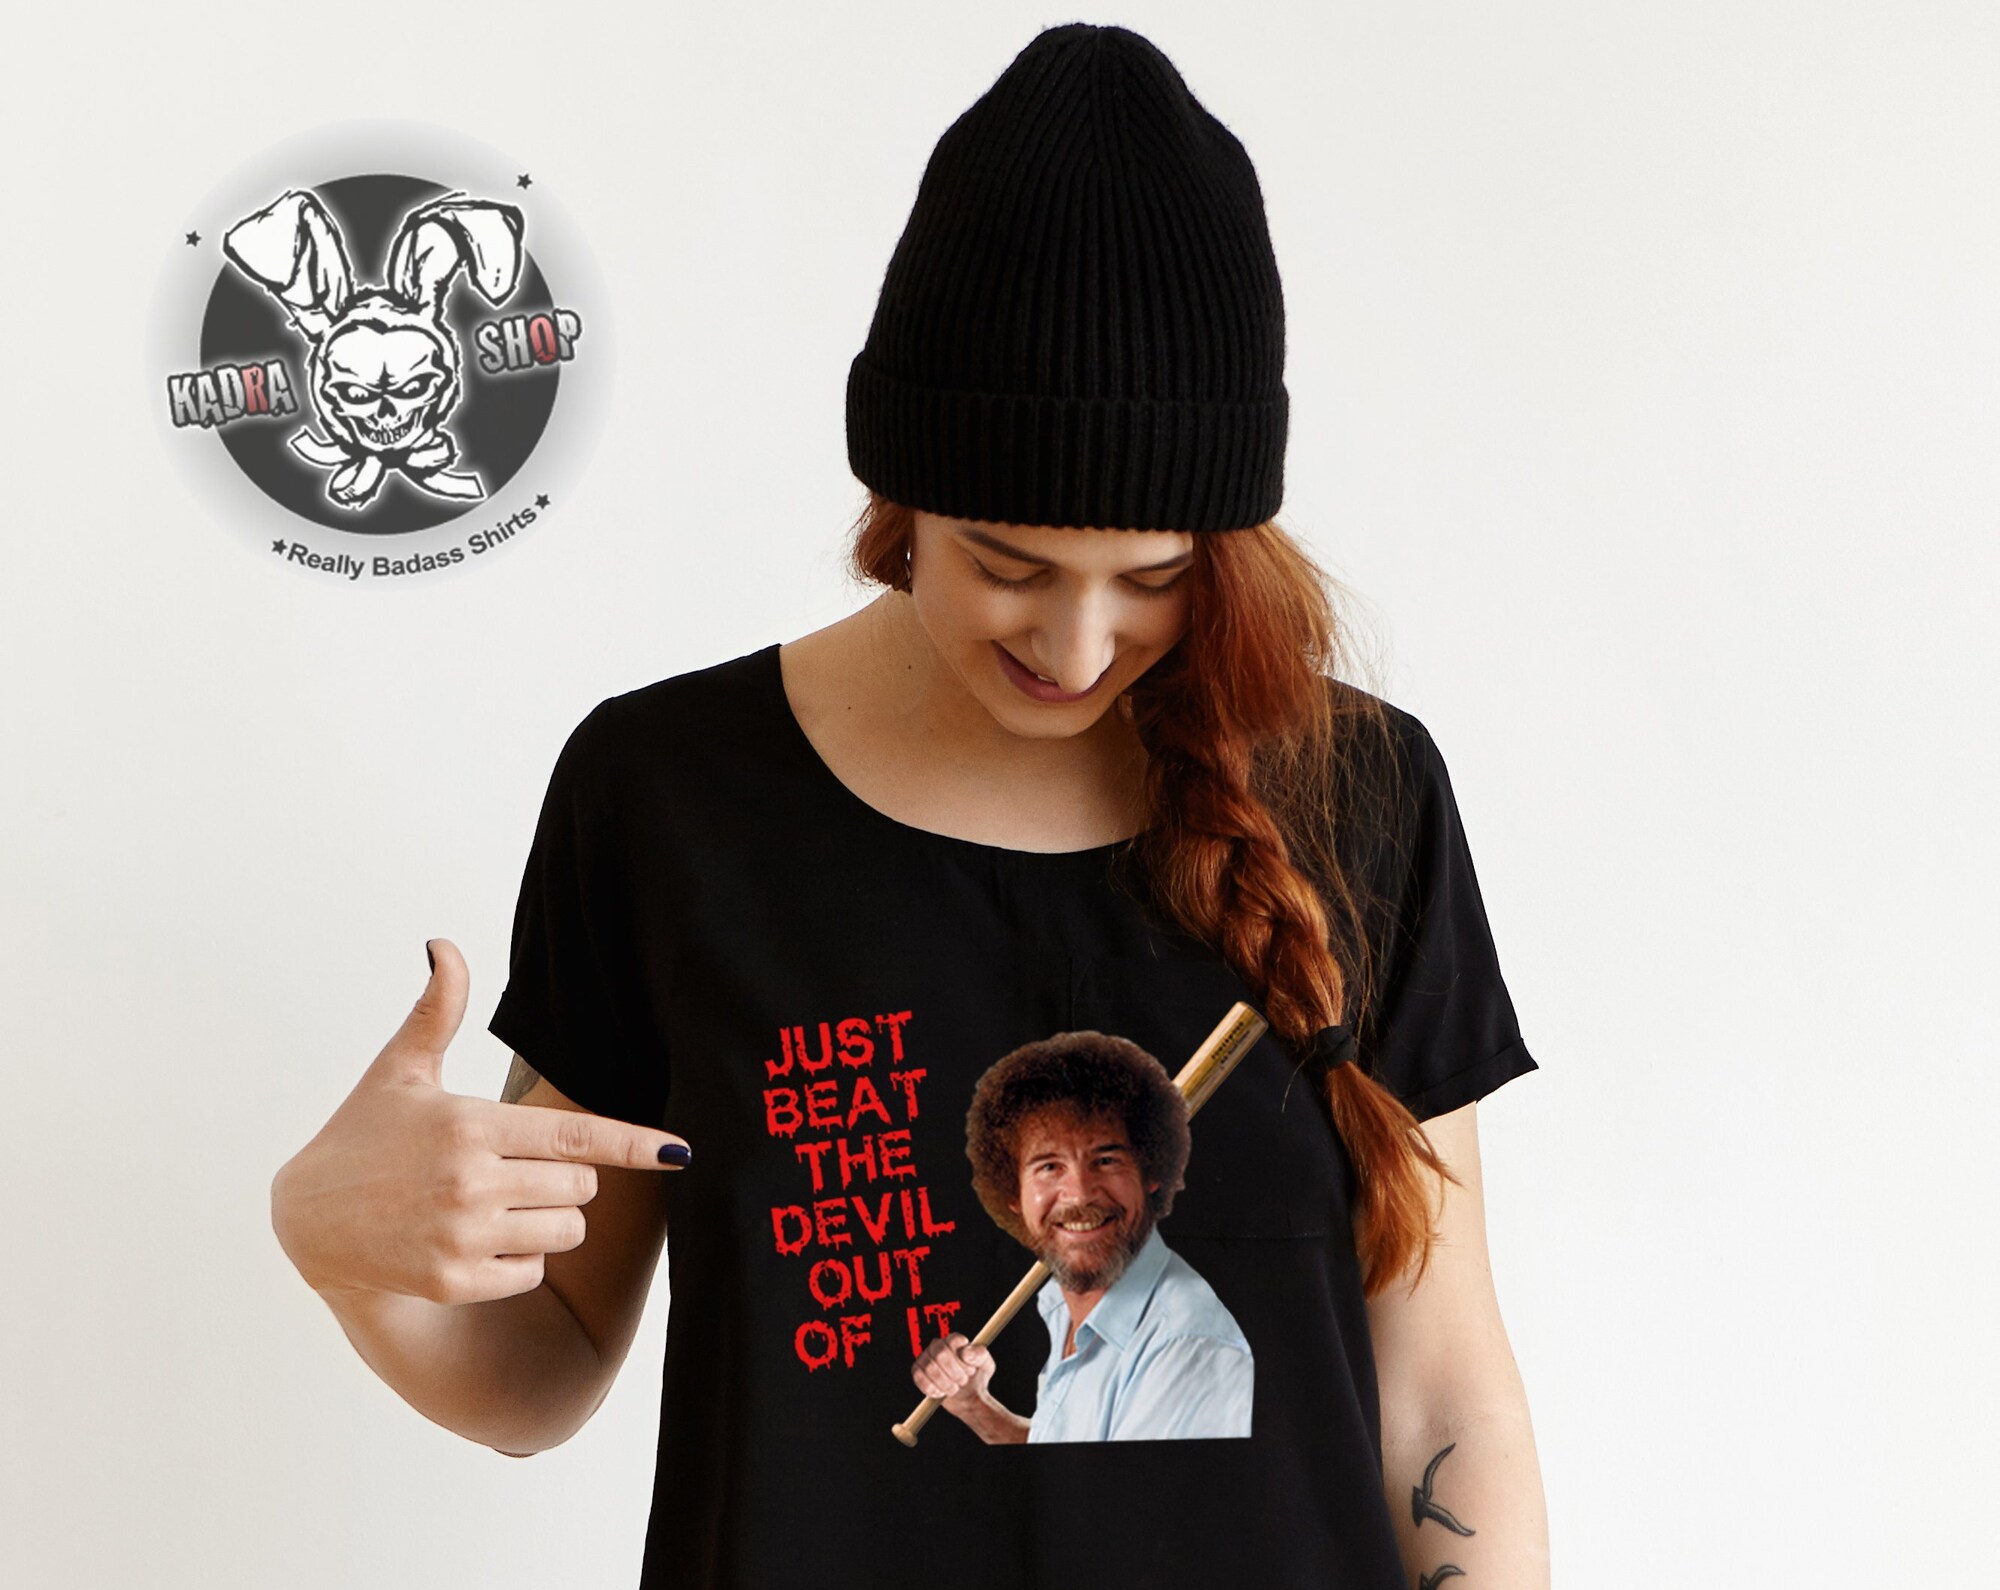 Discover BOB Just beat the devil out of it T-shirt, Hoodie and Shopper funny design man woman available